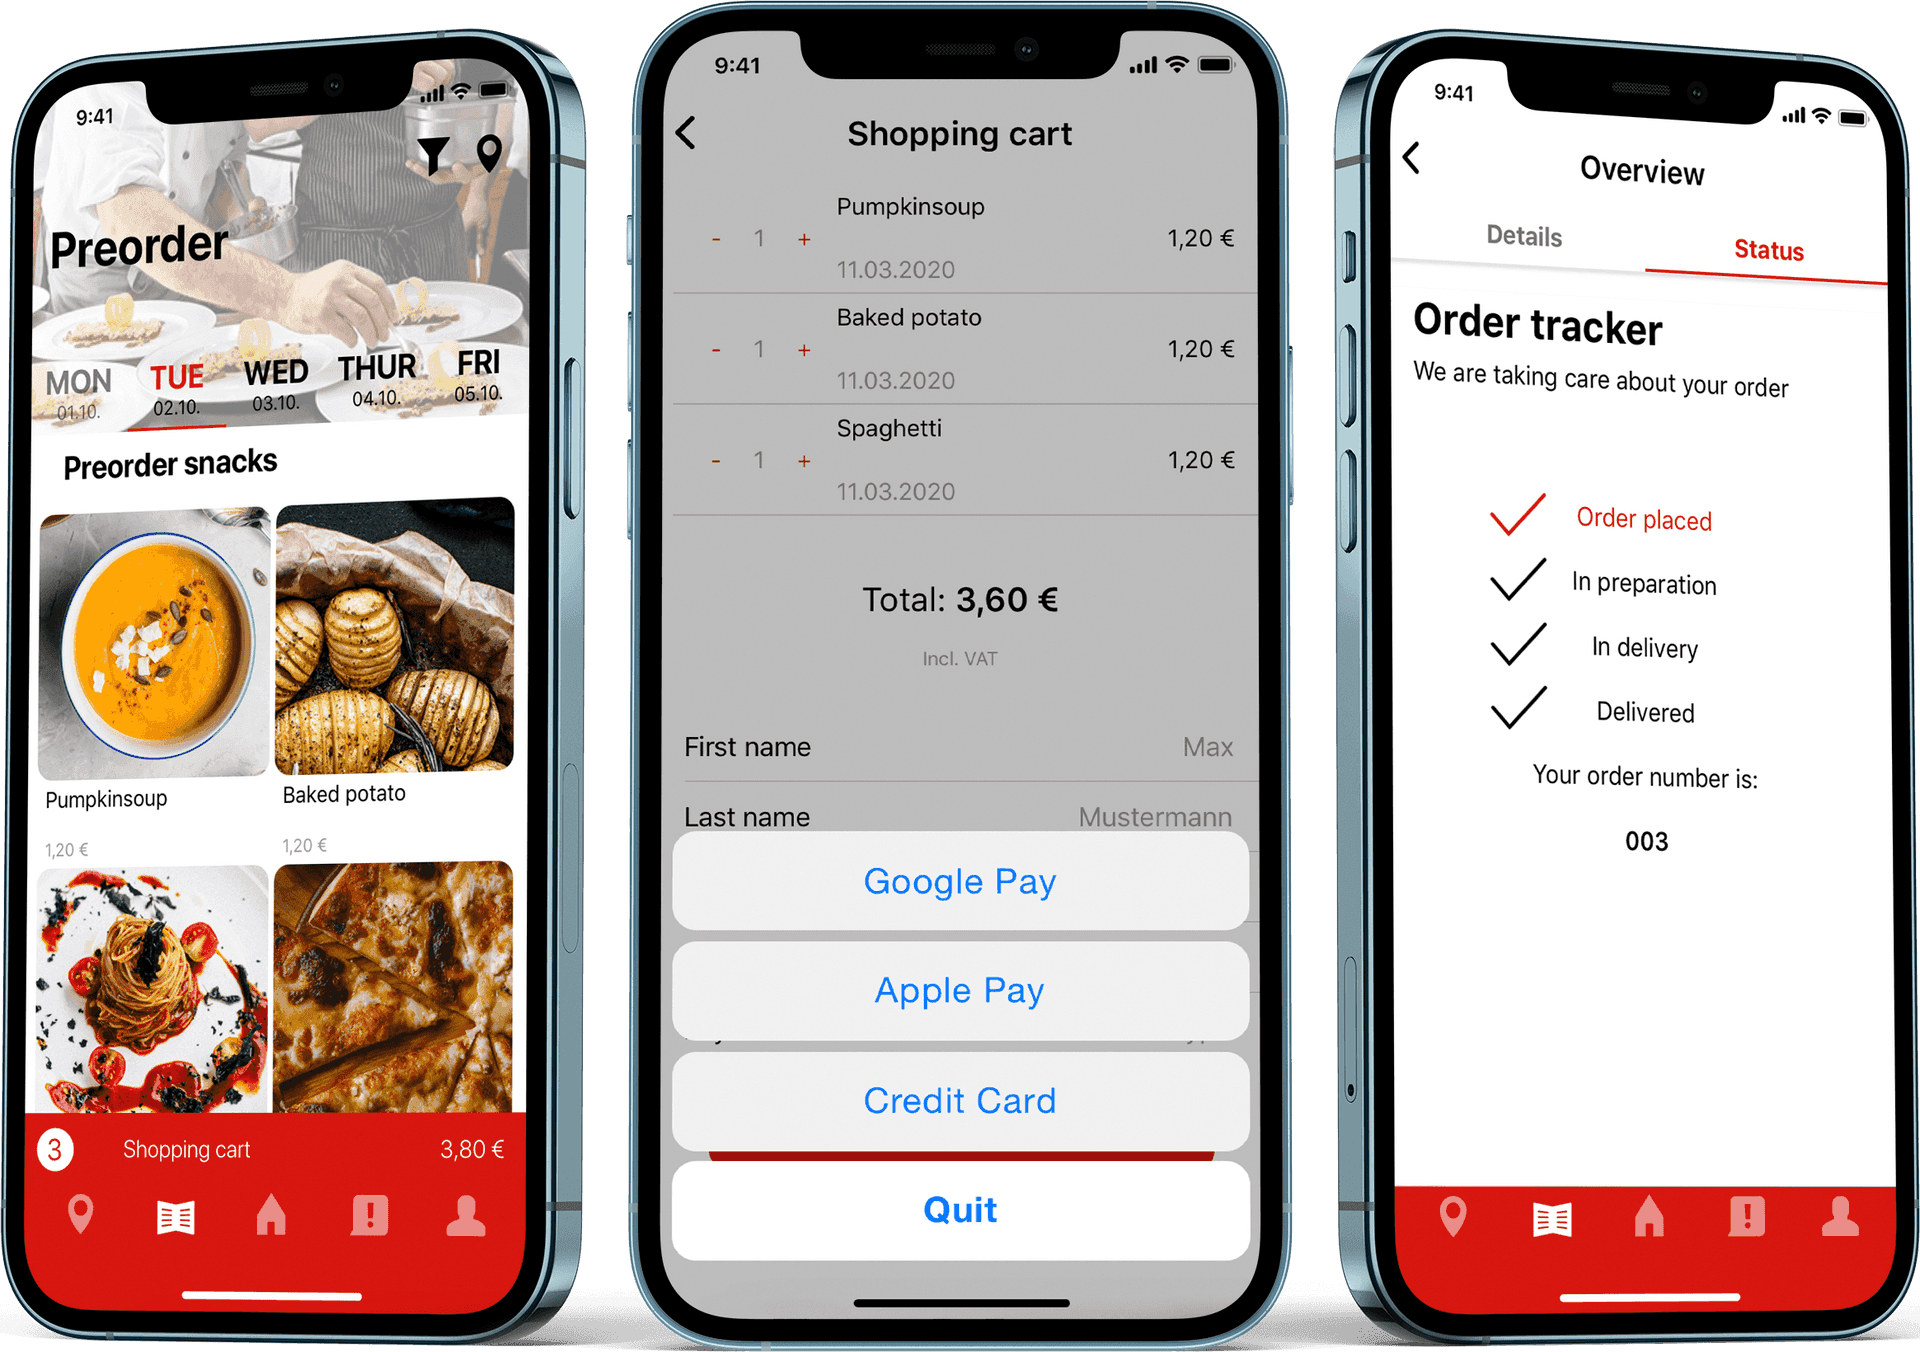 View of 3 mobile phones side by side, 1st mobile phone: pre-order page of the catering portal, 2nd mobile phone: payment options on the catering portal, choice between Google Pay, Apple Pay or credit card, 3rd mobile phone: order status